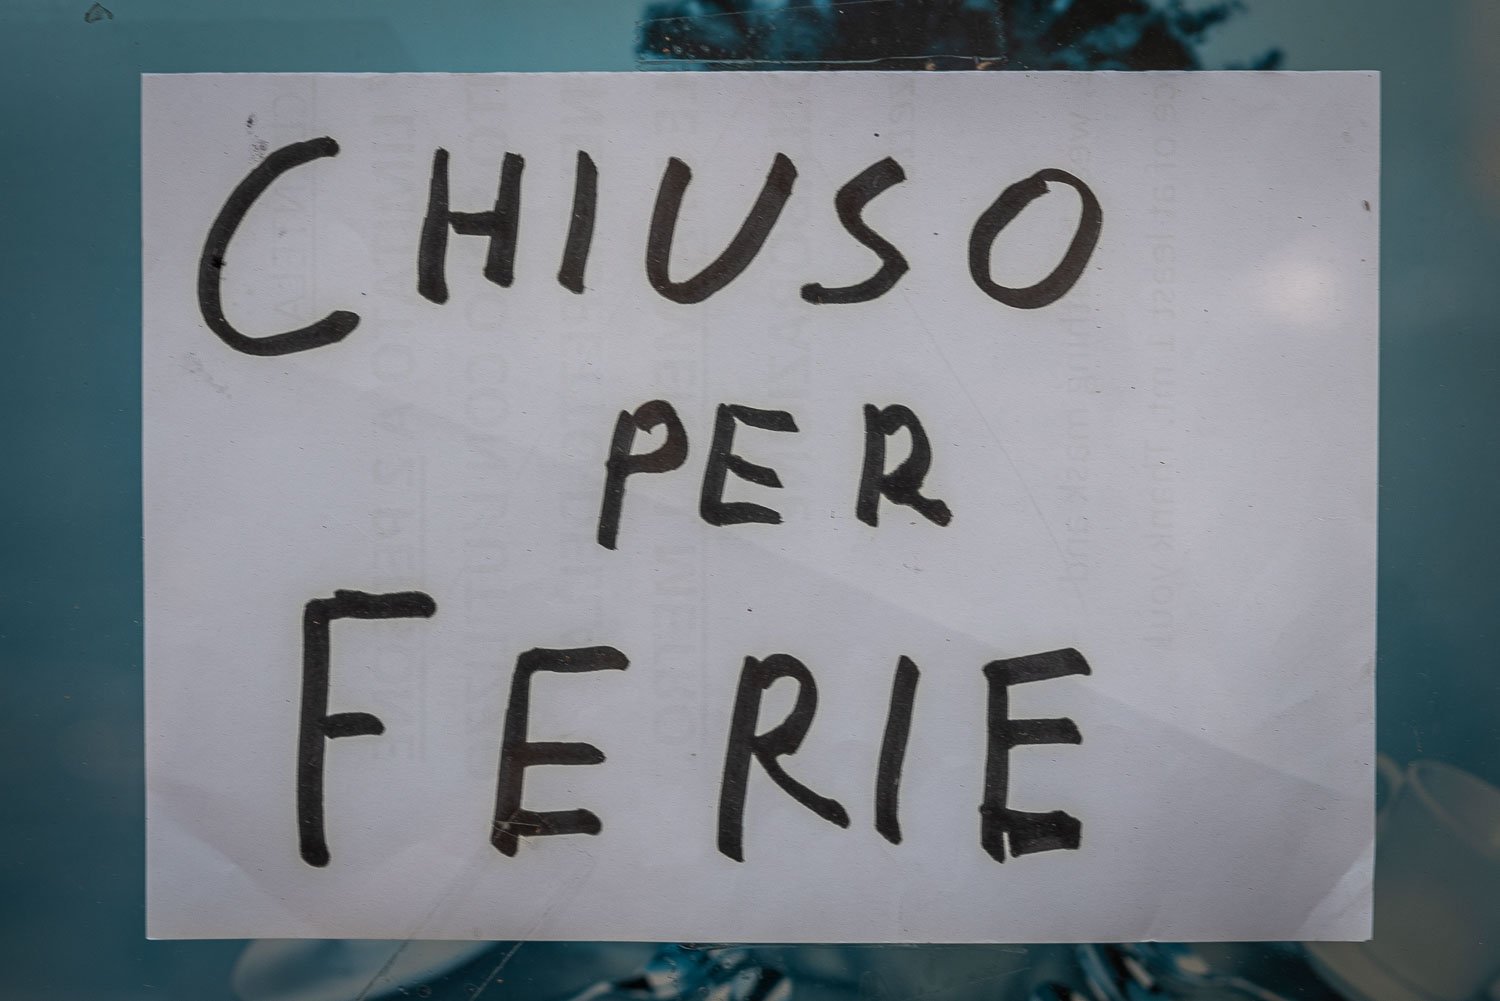 Ferragosto In Italy - Closed For Vacation